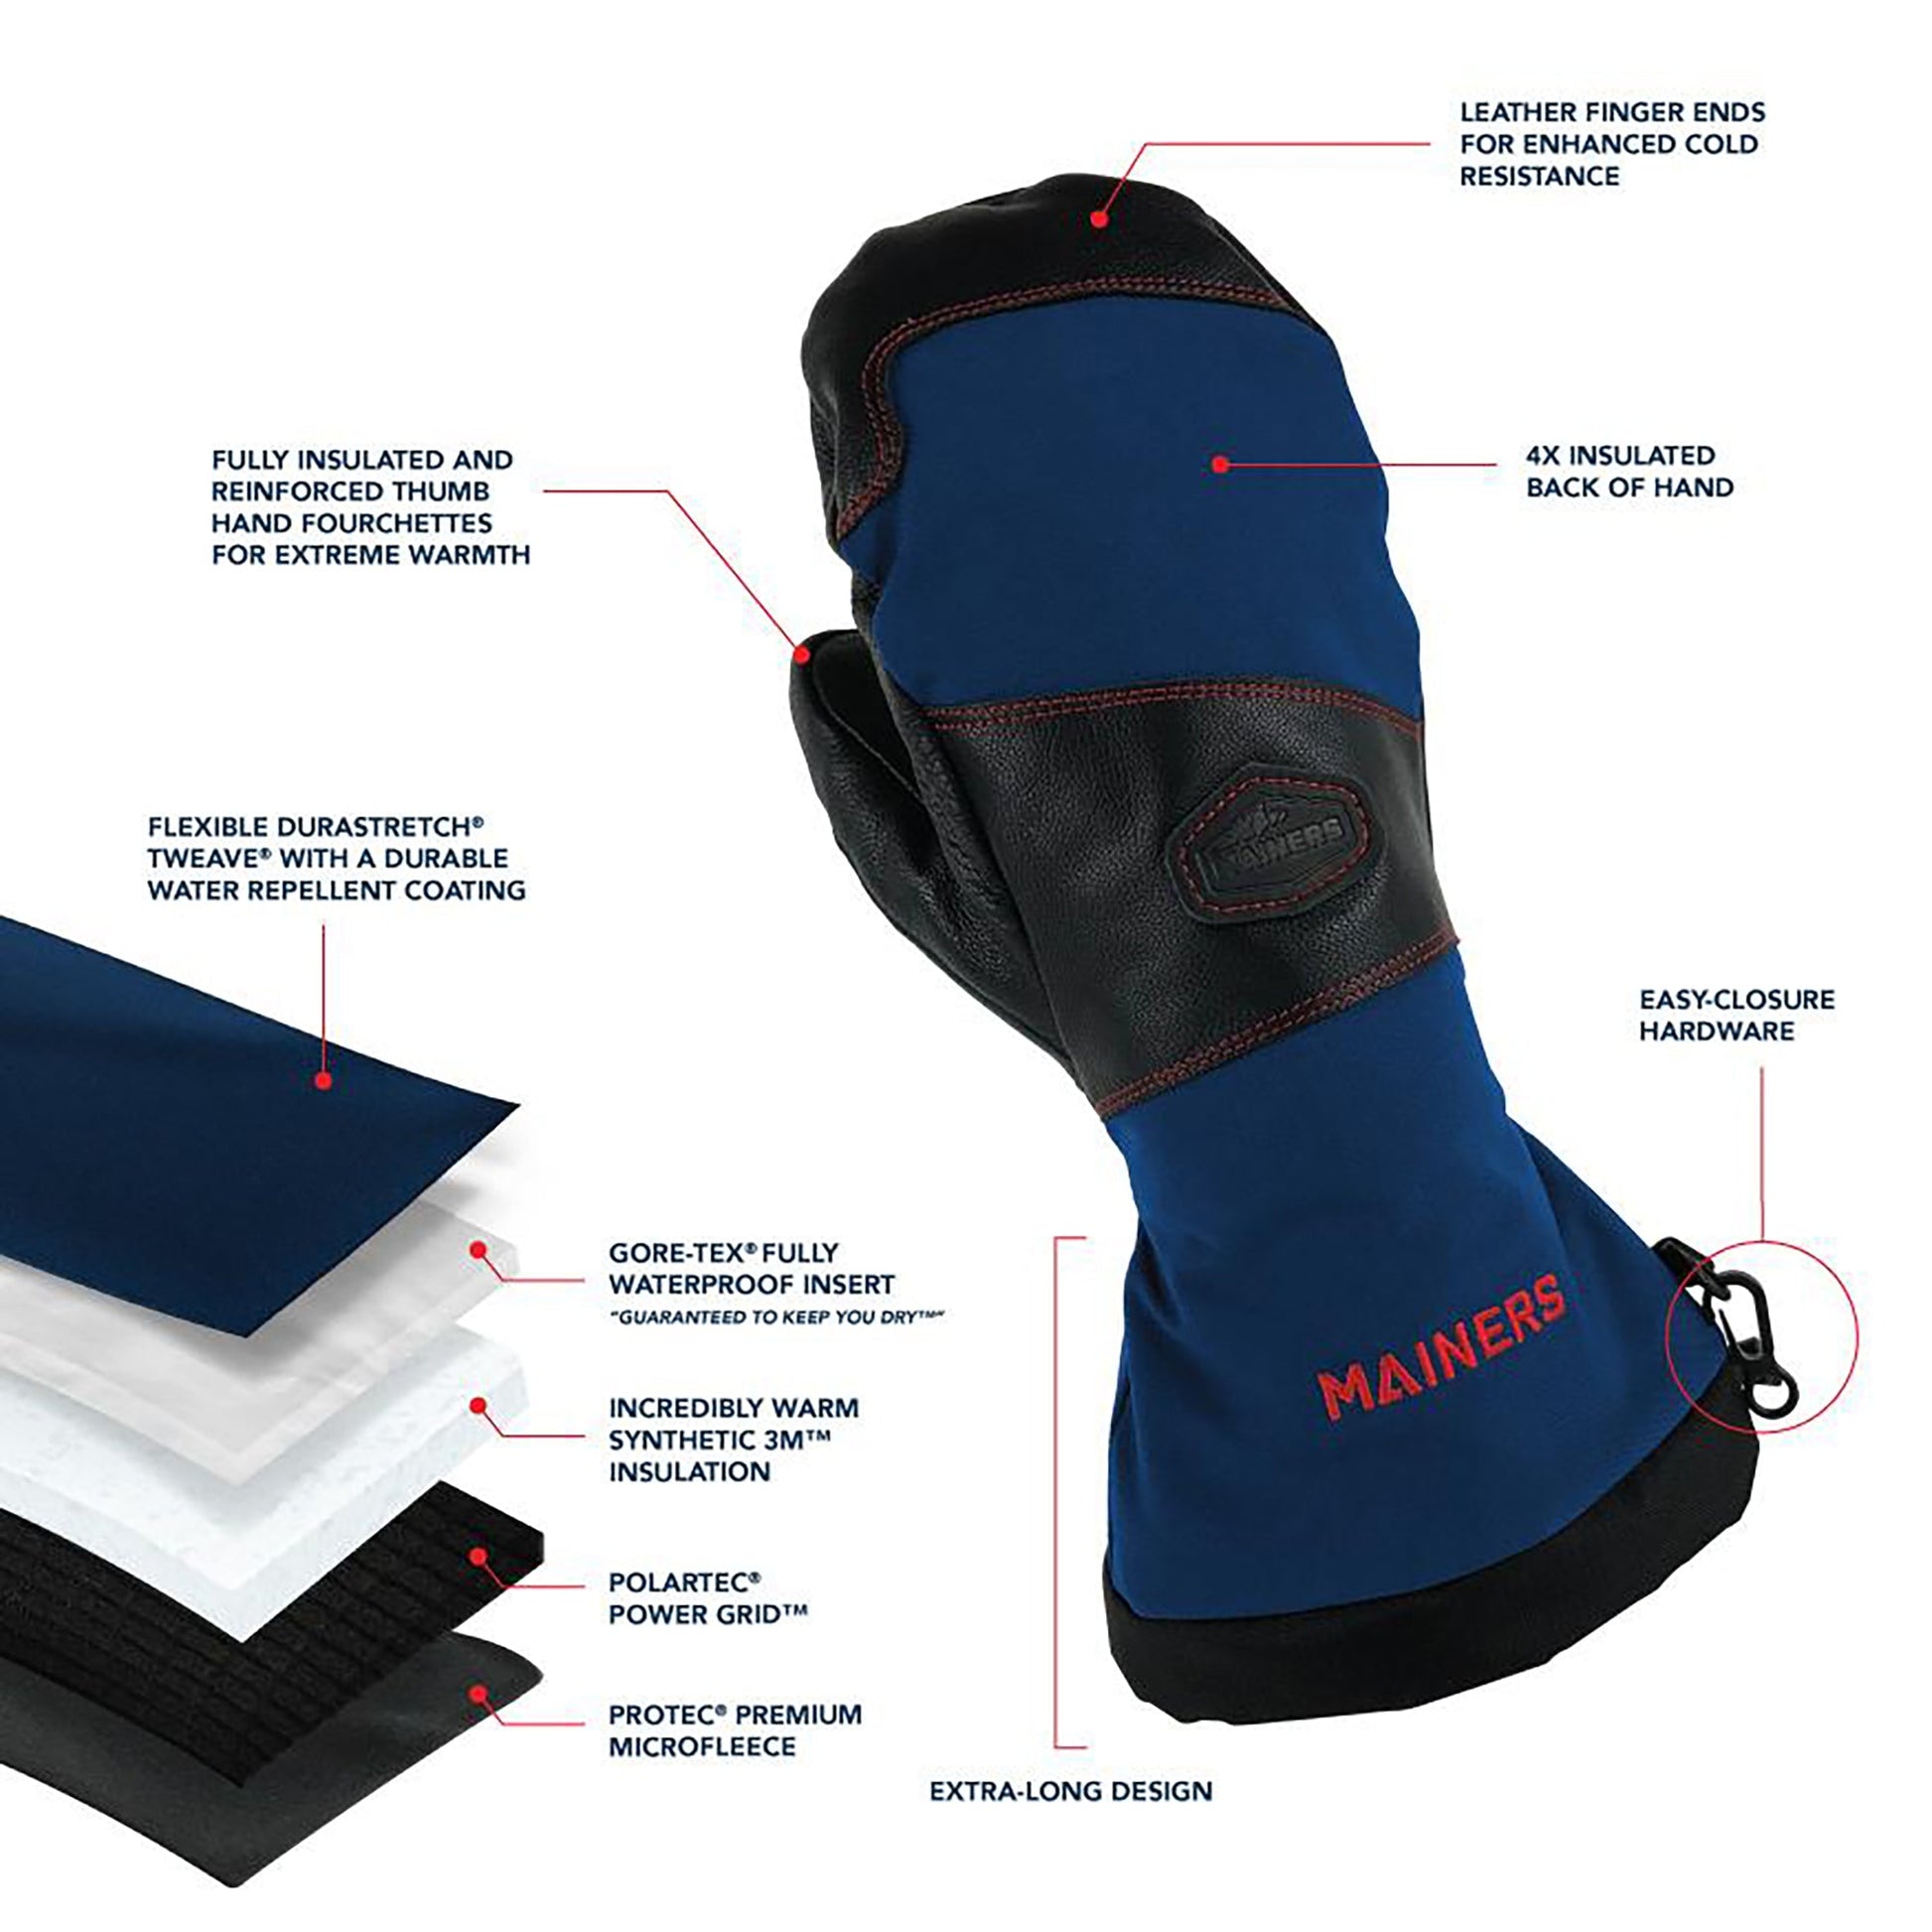 A pair of Mainers Mitts ski mitts, known for their resistance and durability, featuring various functions.